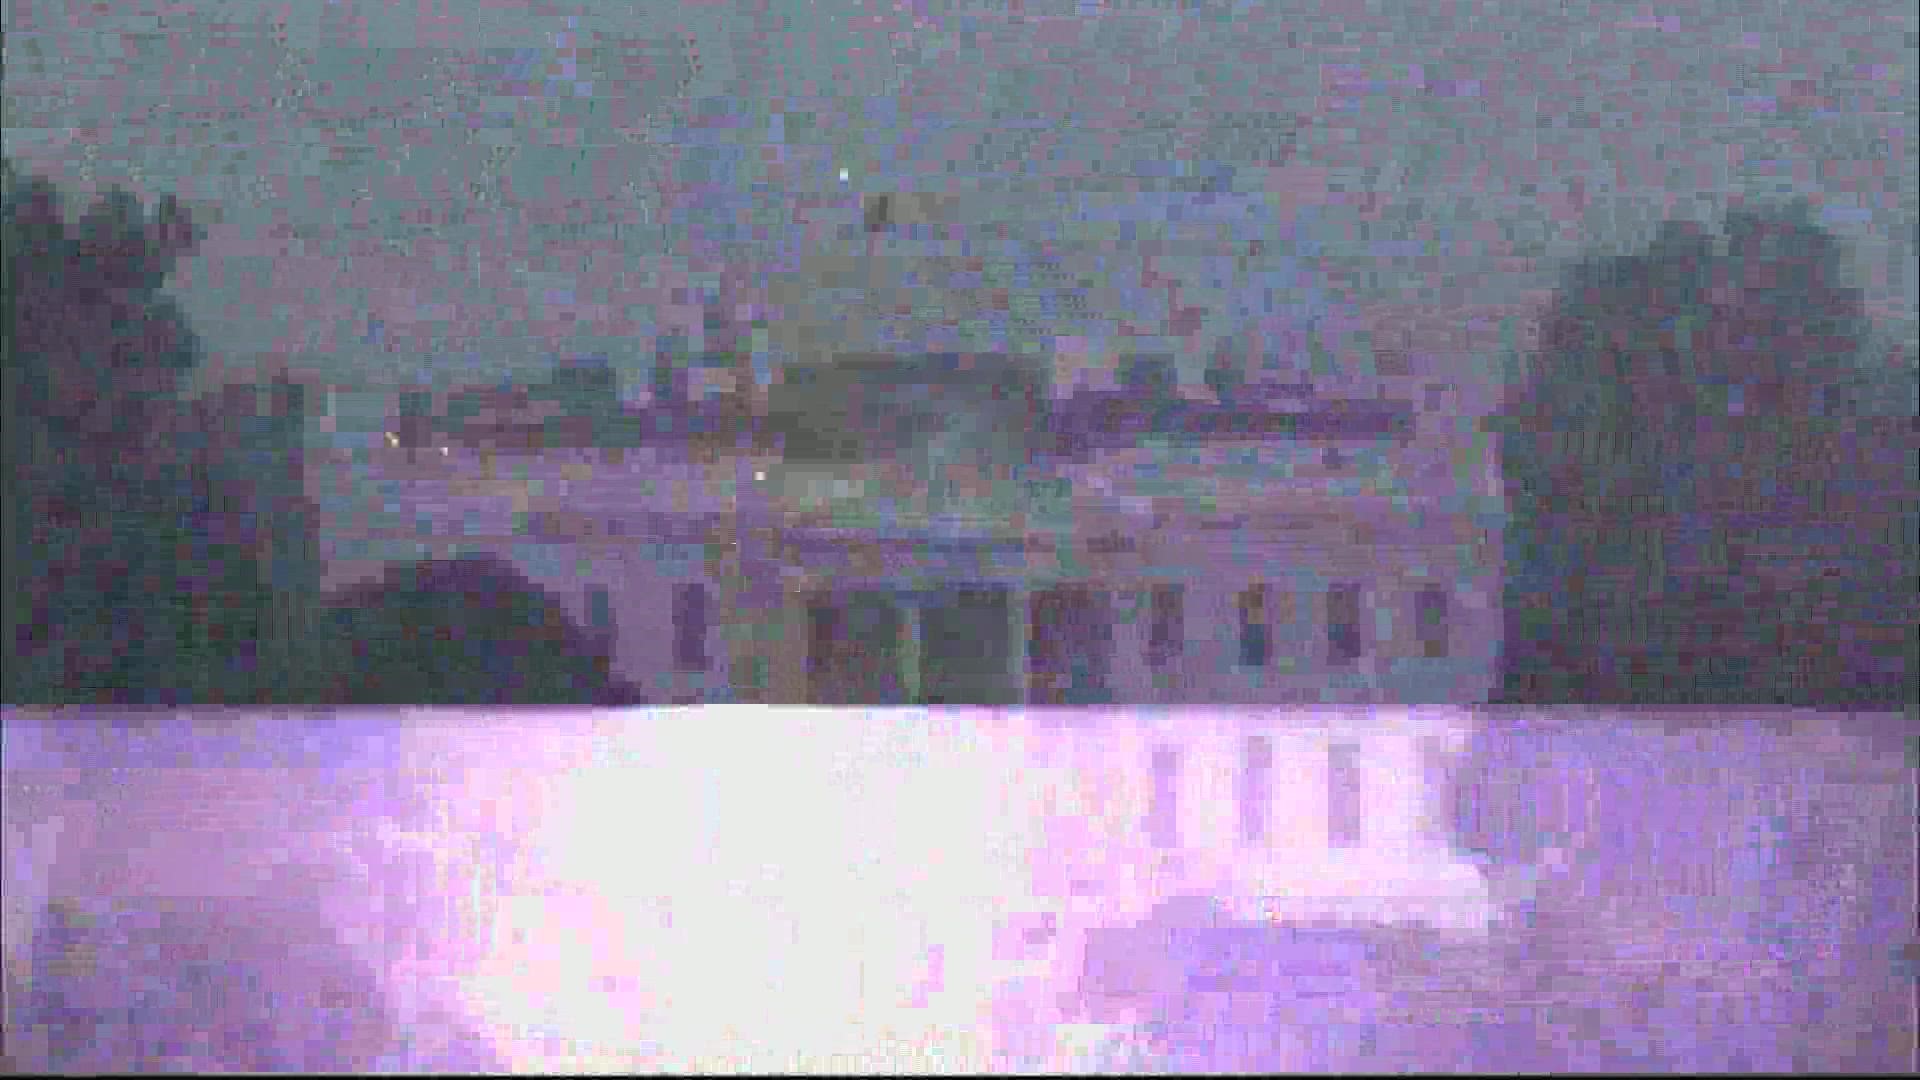 The four people were at a park outside the White House when the lightning strike hit